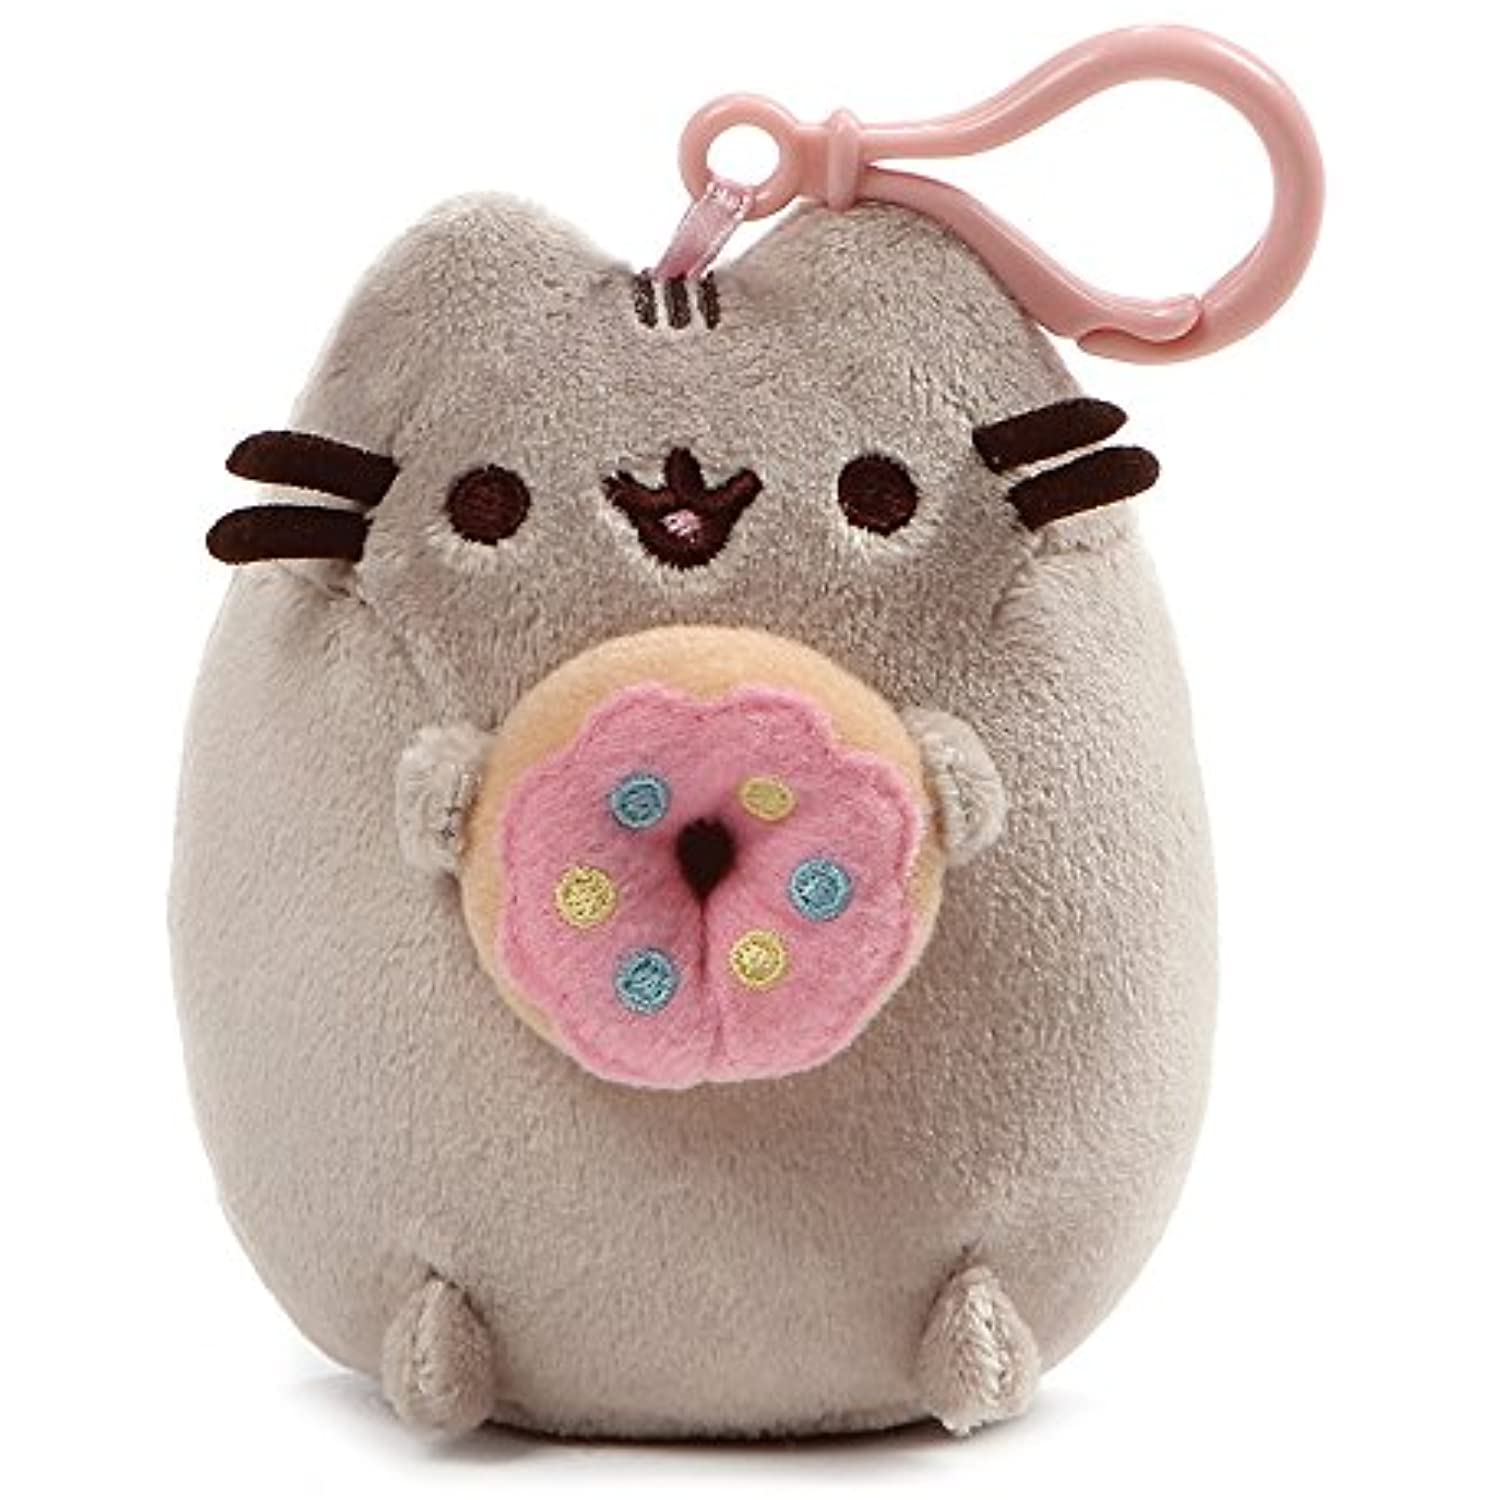 GUND Donut Snackable Plush Bundle with Donut Backpack Clip